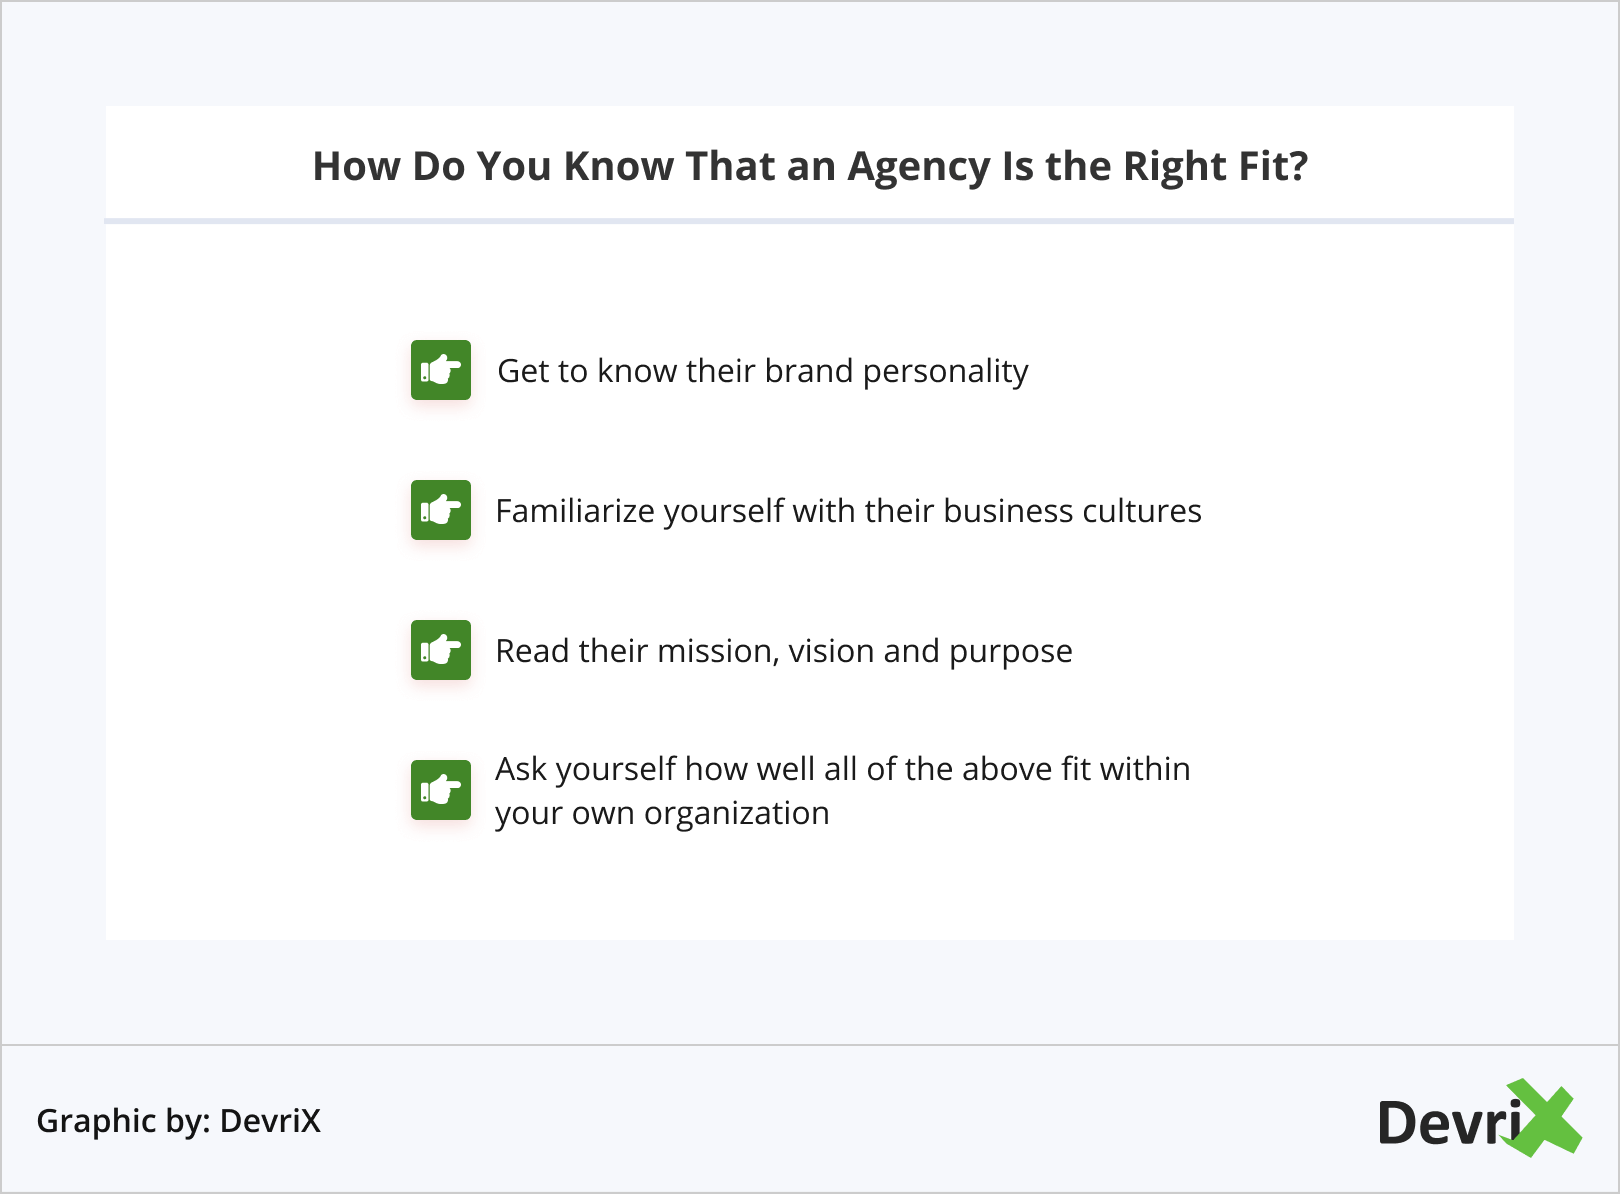 How Do You Know That an Agency Is the Right Fit